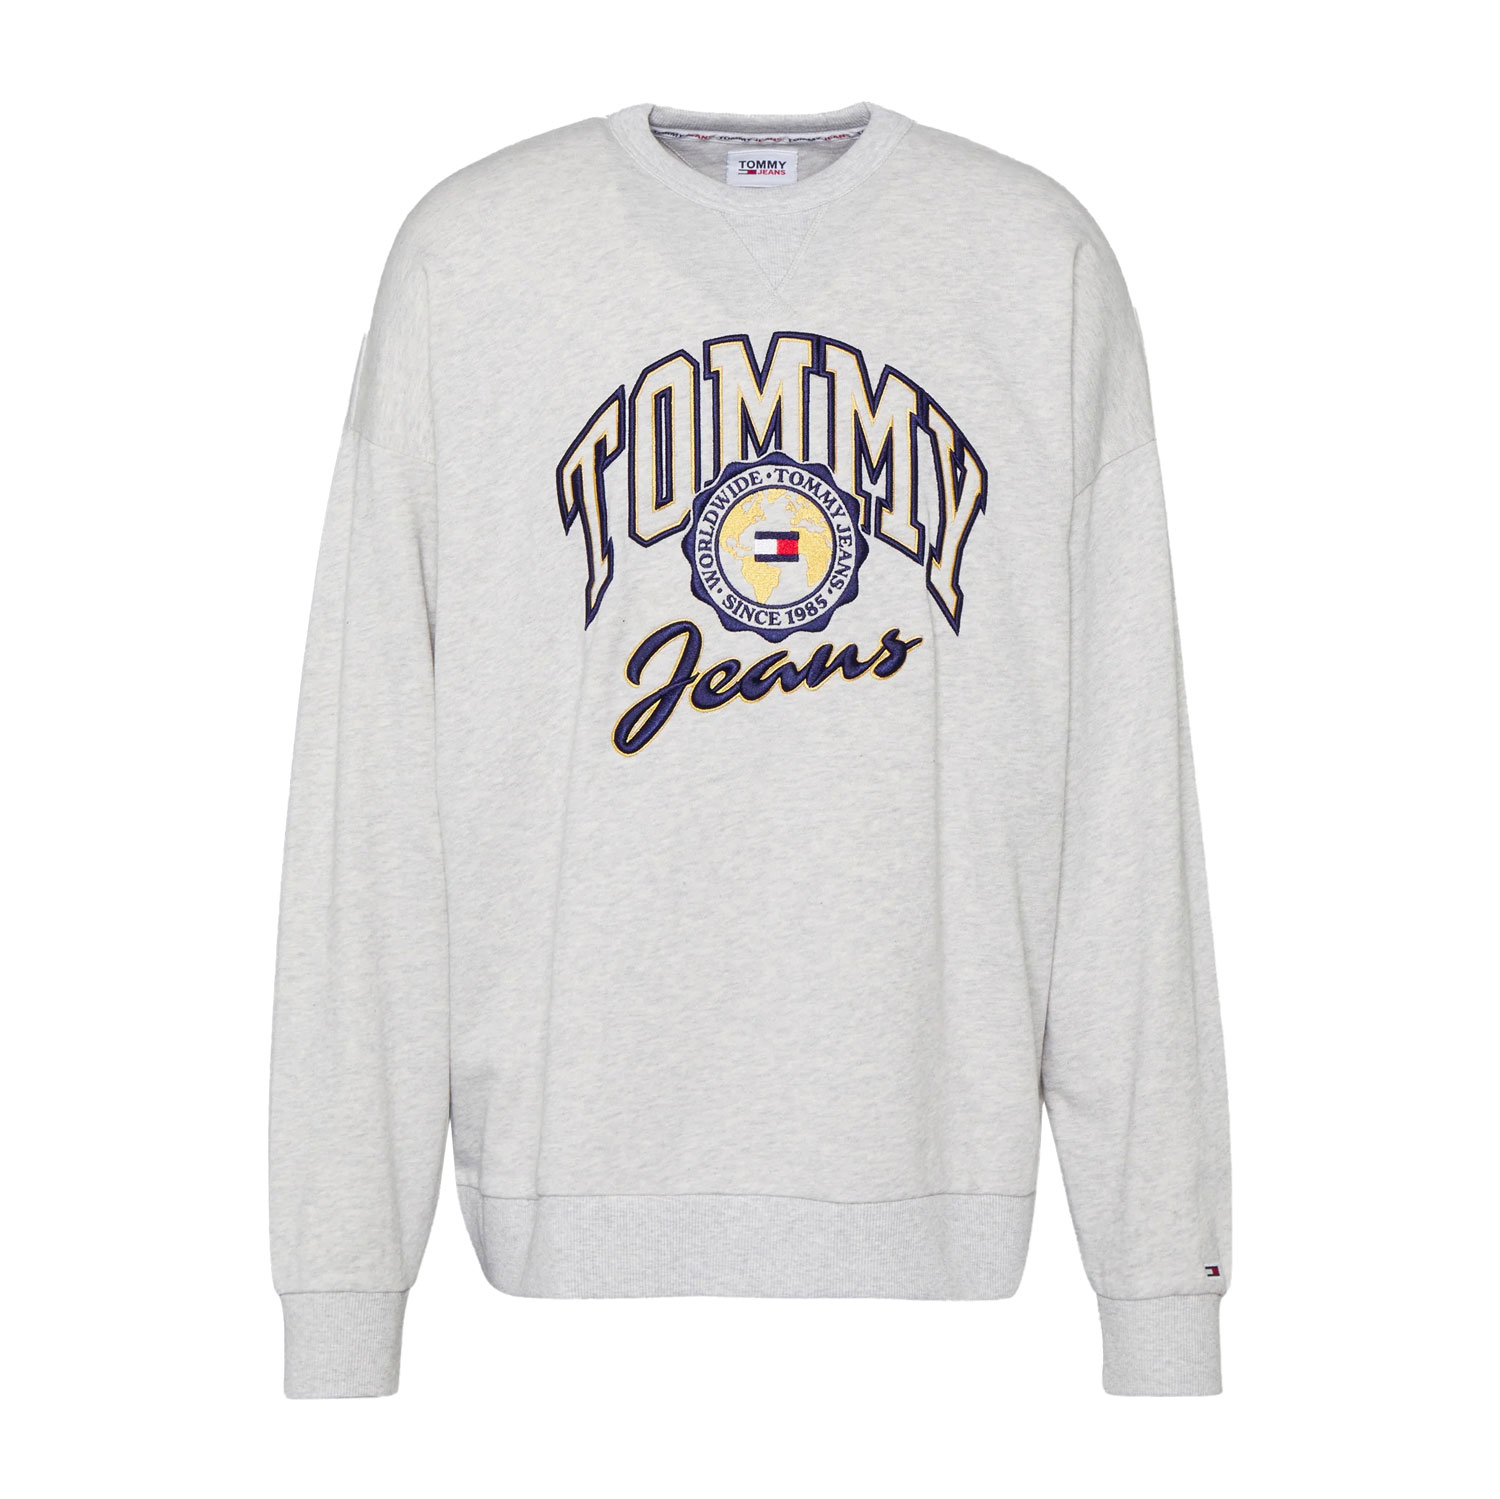 Tommy Jeans College Archive Crew - Silver/Grey Heather